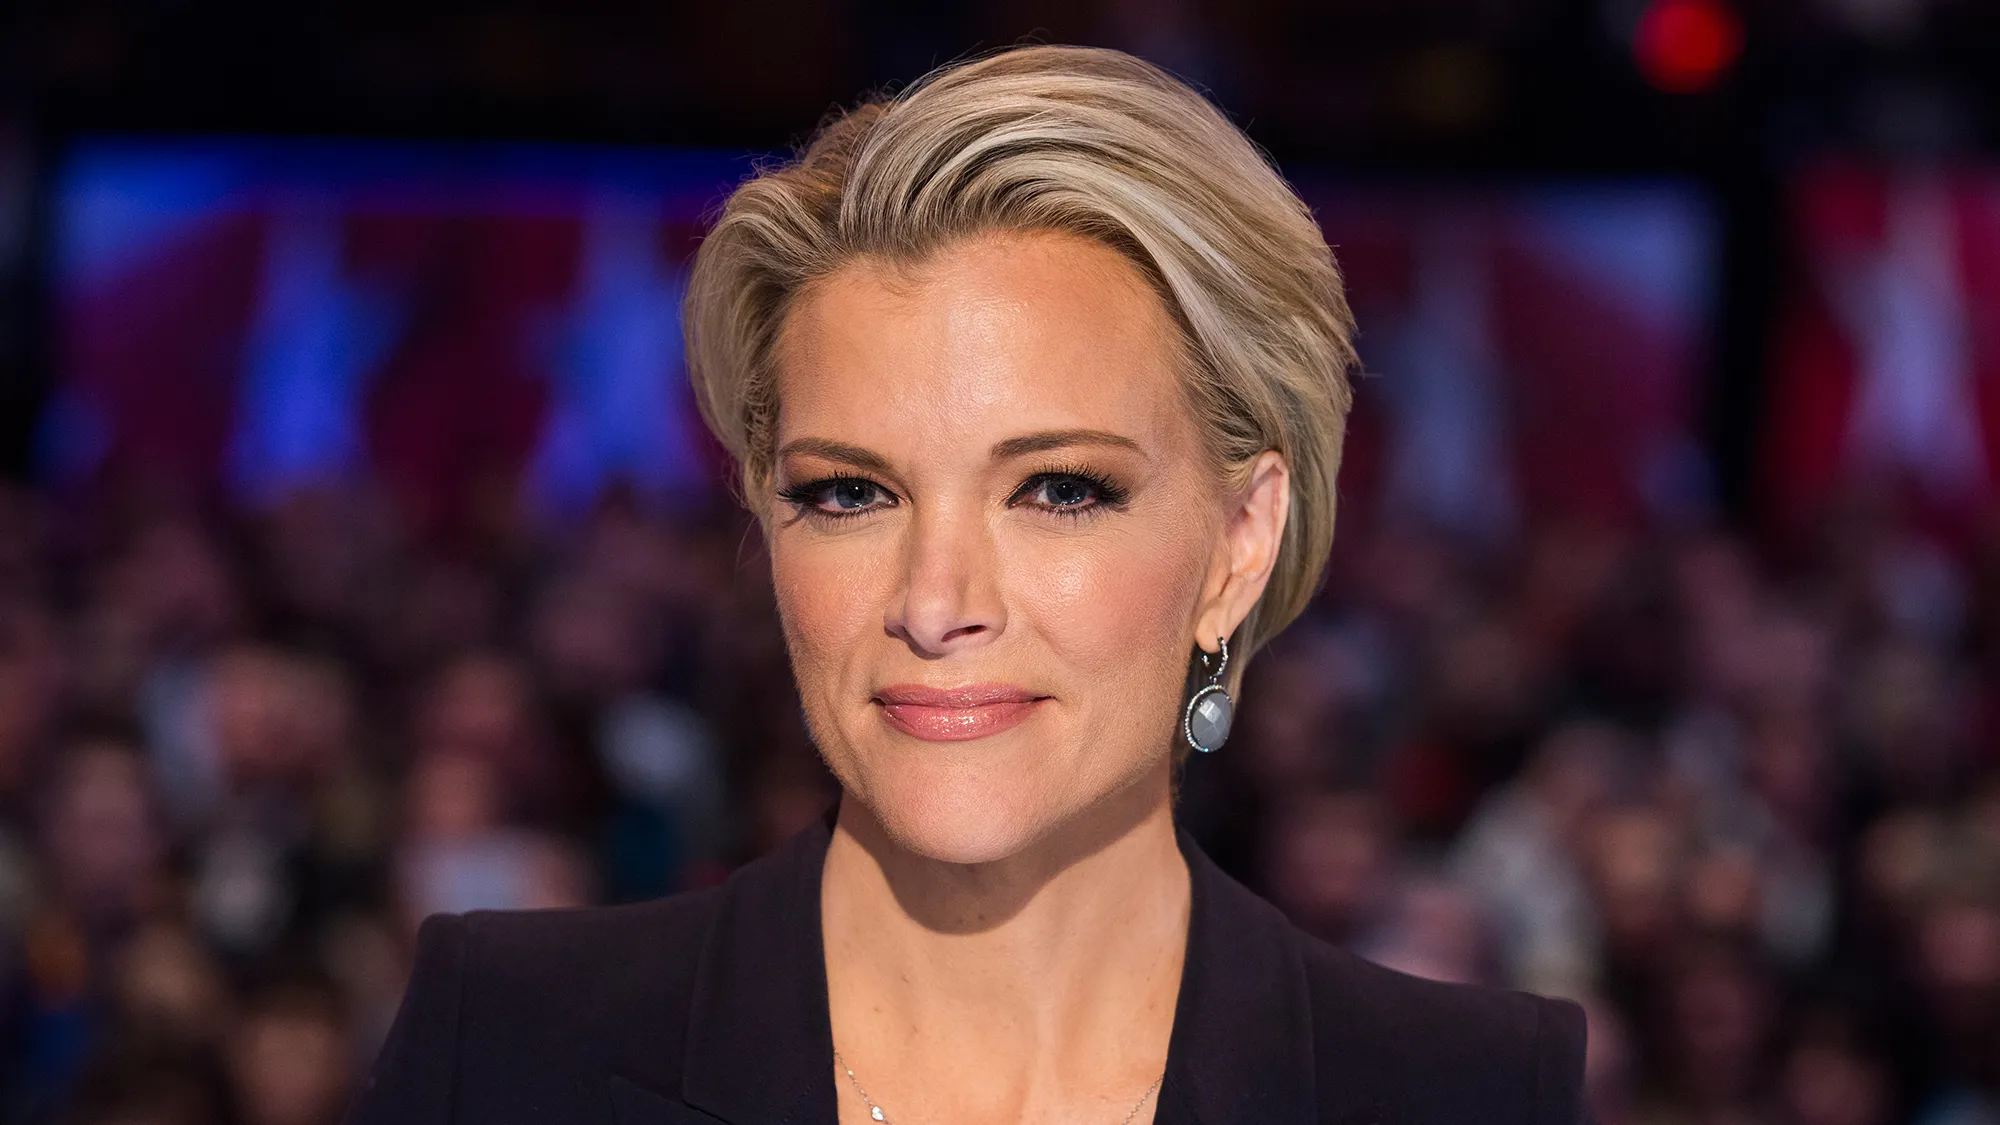 Megyn Kelly Calls Out Don Lemon Ahead of His Return to Television: 'This Is a Pattern with This Guy'